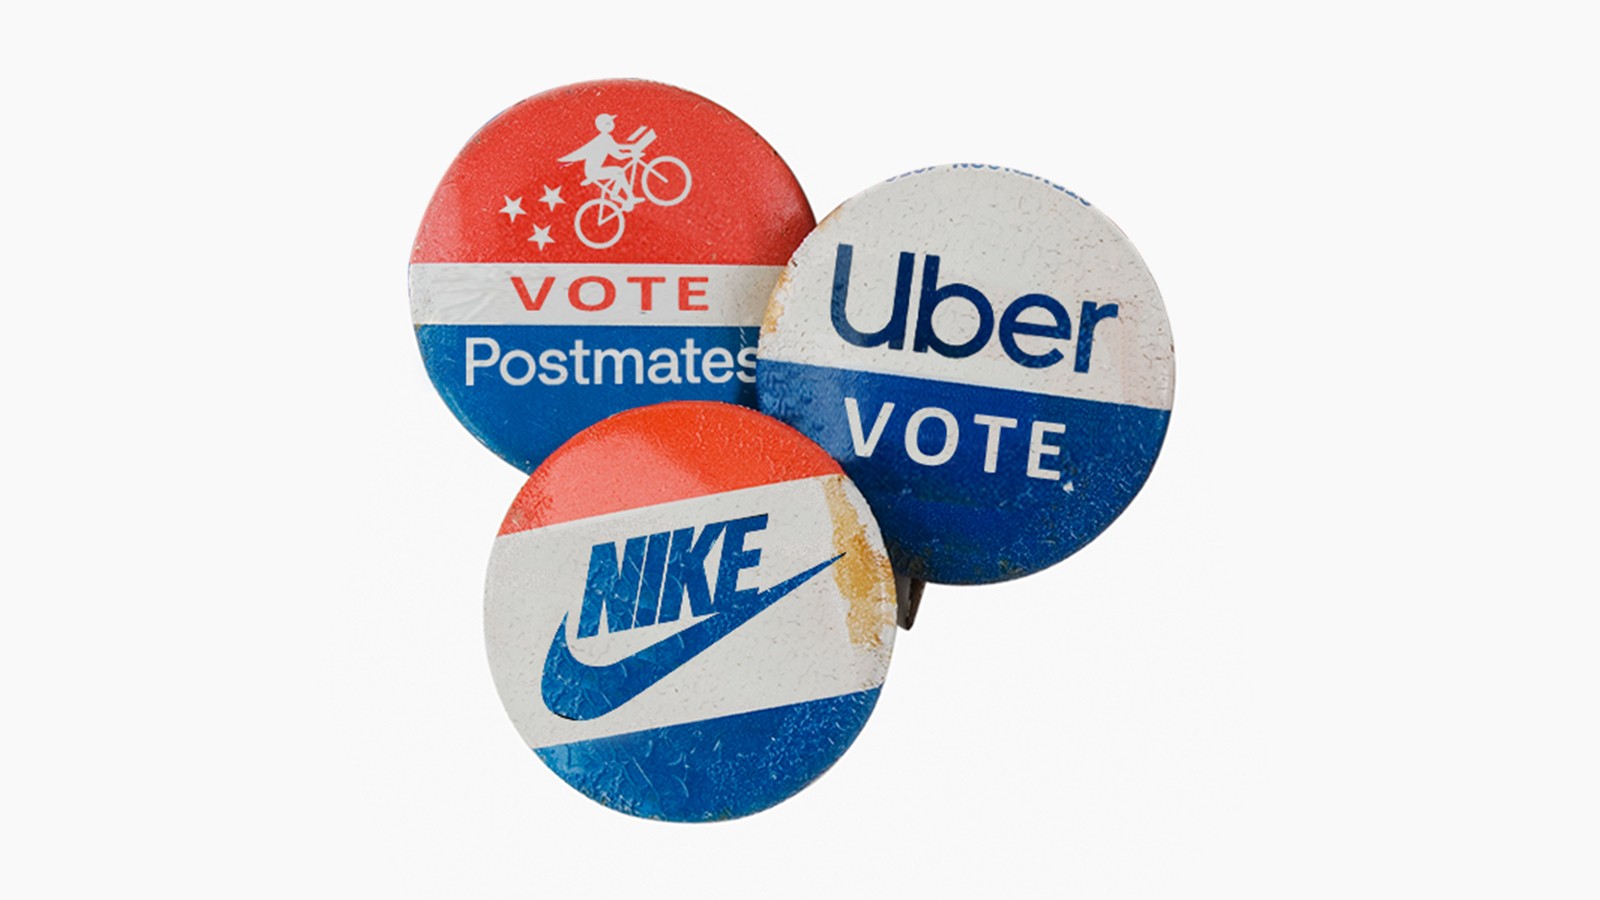 Election Brands Are Turning Voting Into Marketing The Atlantic